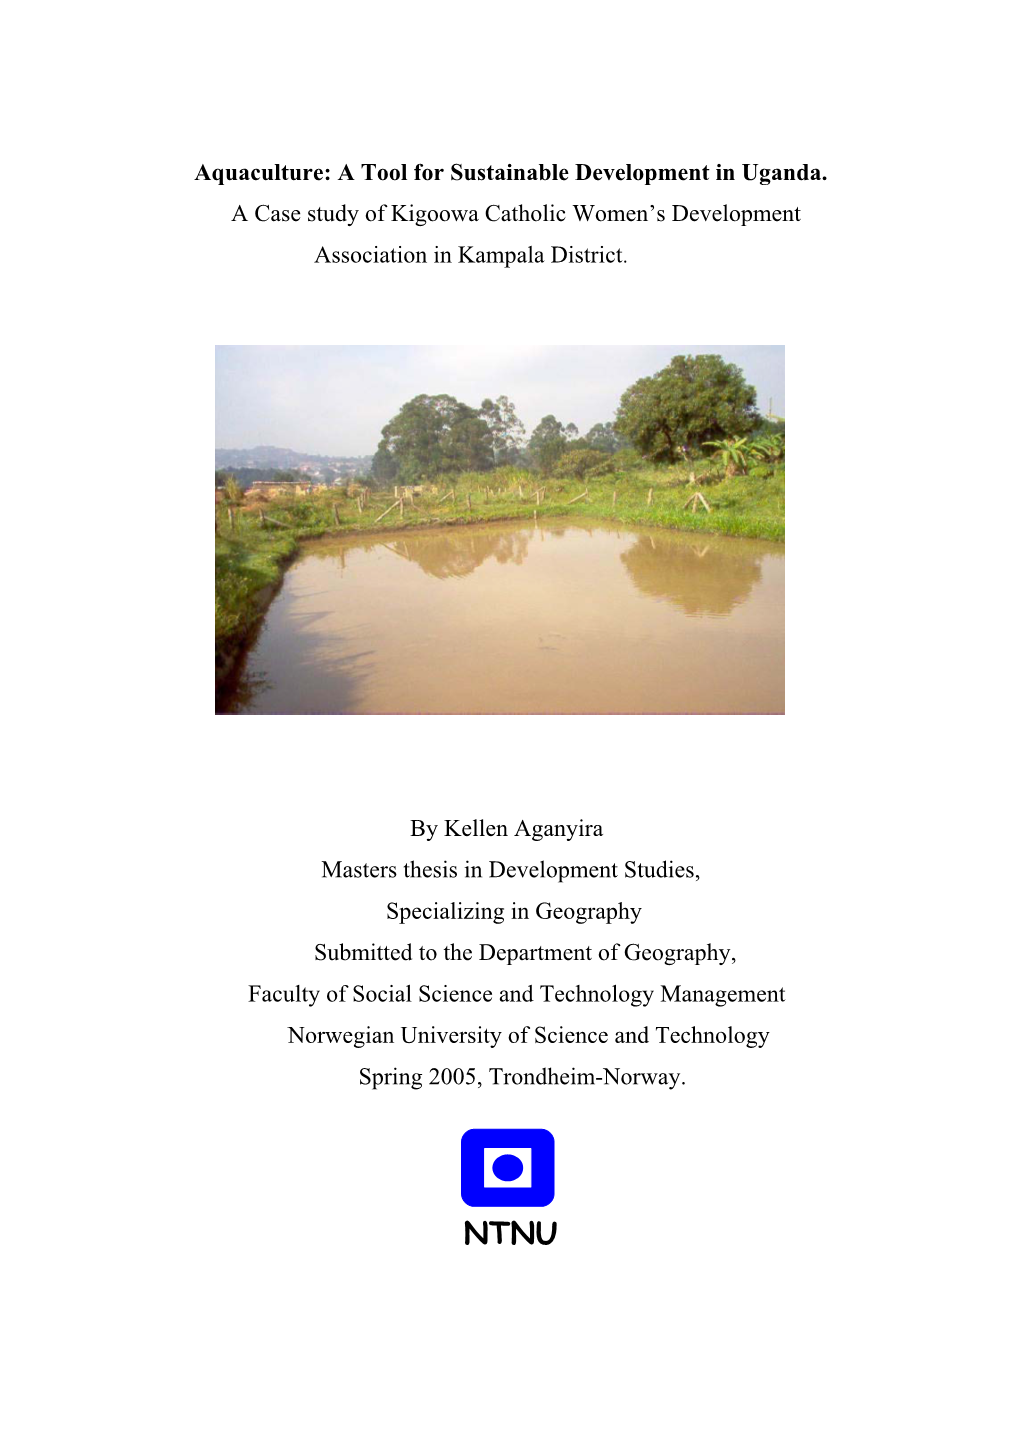 Aquaculture: a Tool for Sustainable Development in Uganda